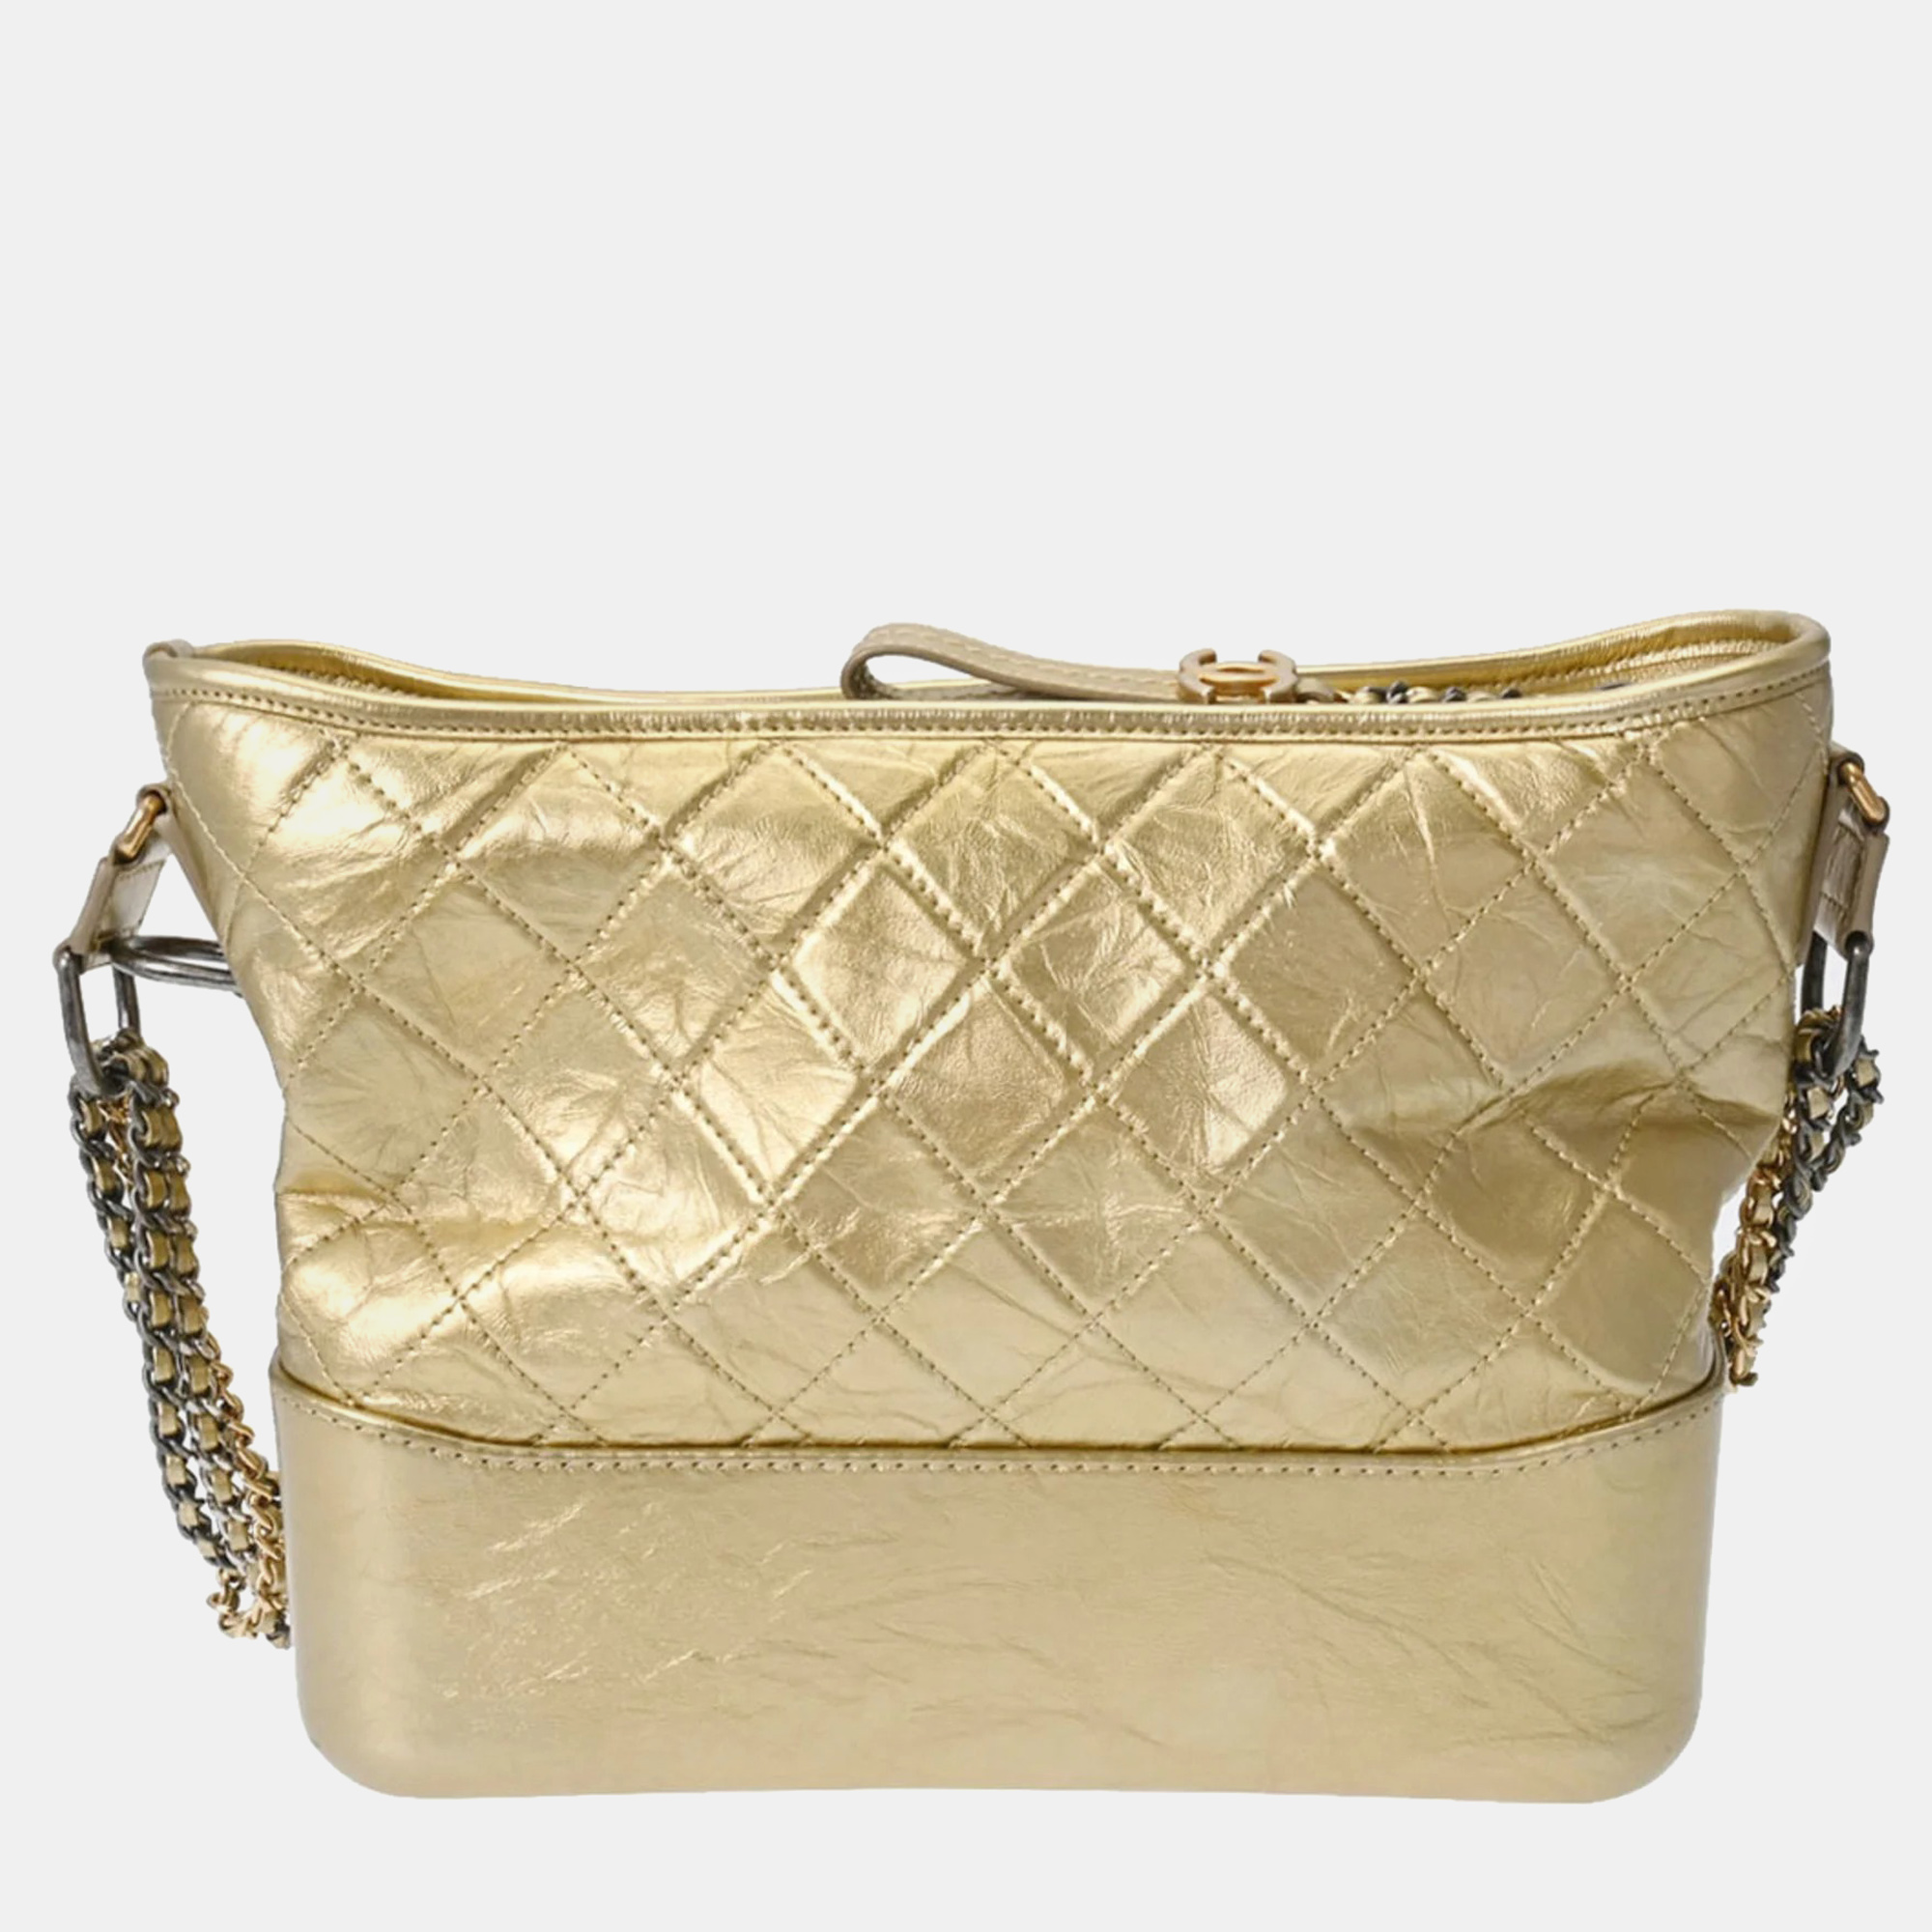 Chanel gold leather small gabrielle shoulder bags